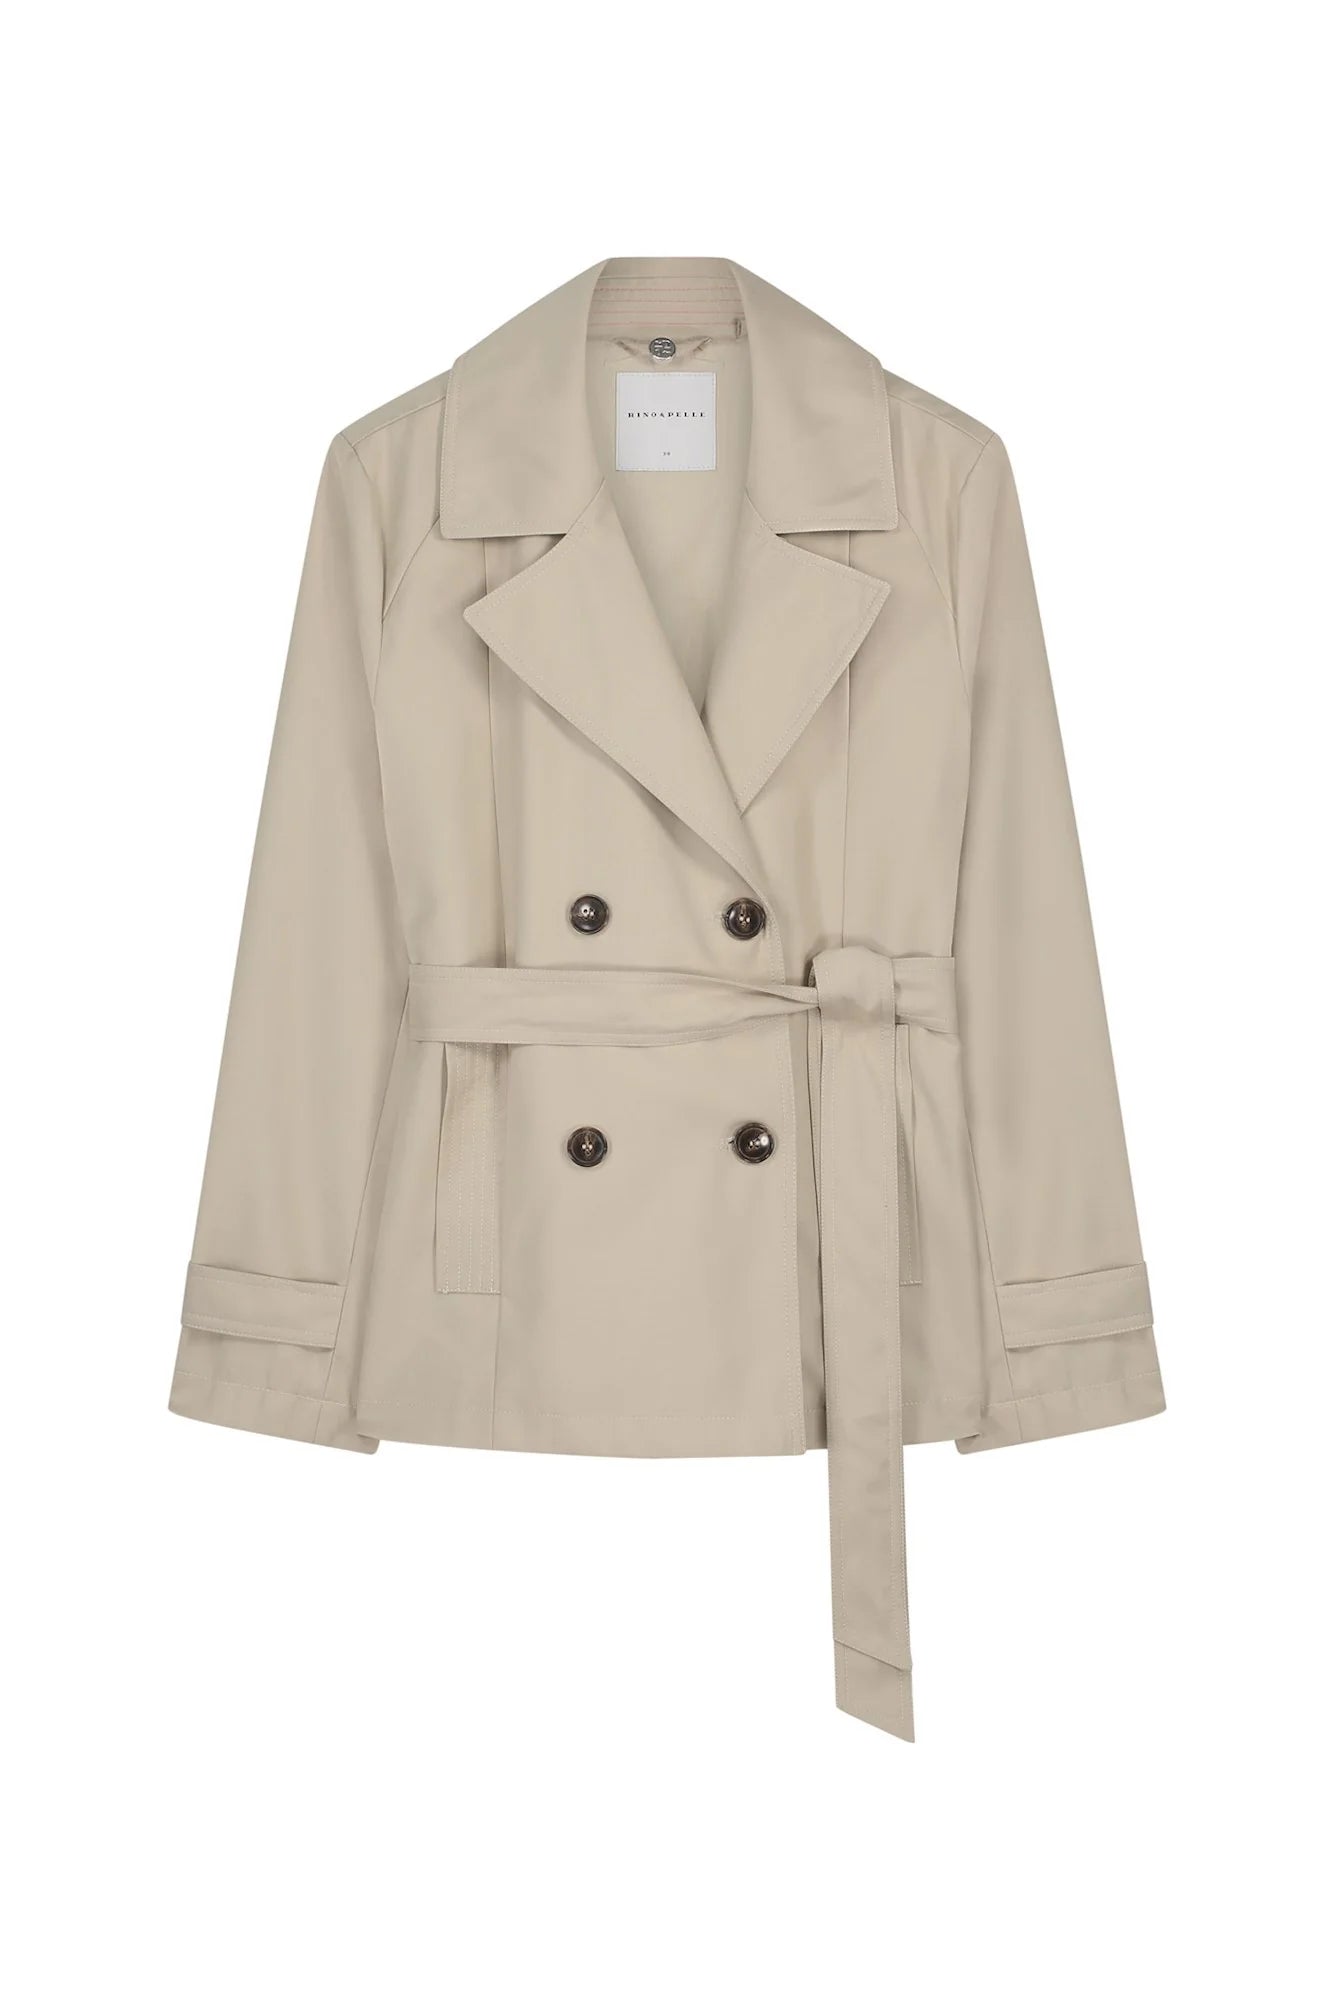 Rino and Pelle Bay Short Trench Jacket